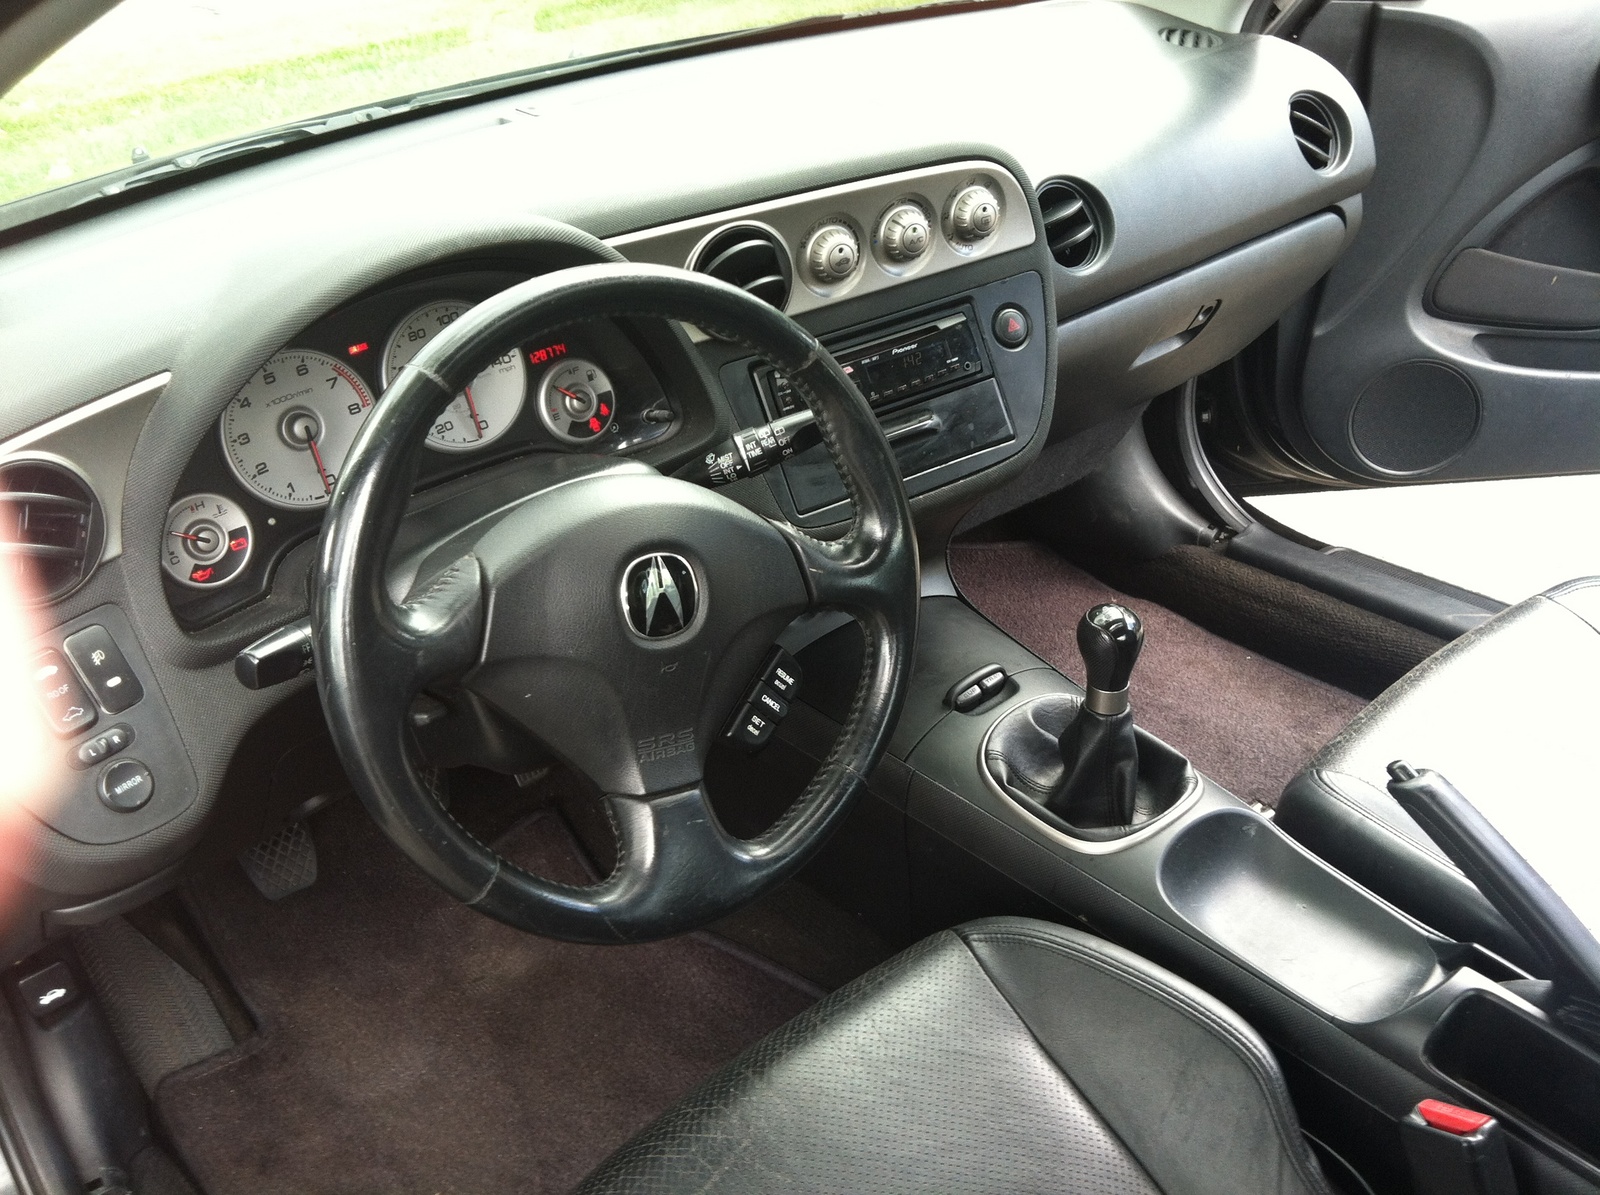 2003 Acura RSX Coupe - Pictures - Picture of 2003 Acura RSX Coup.